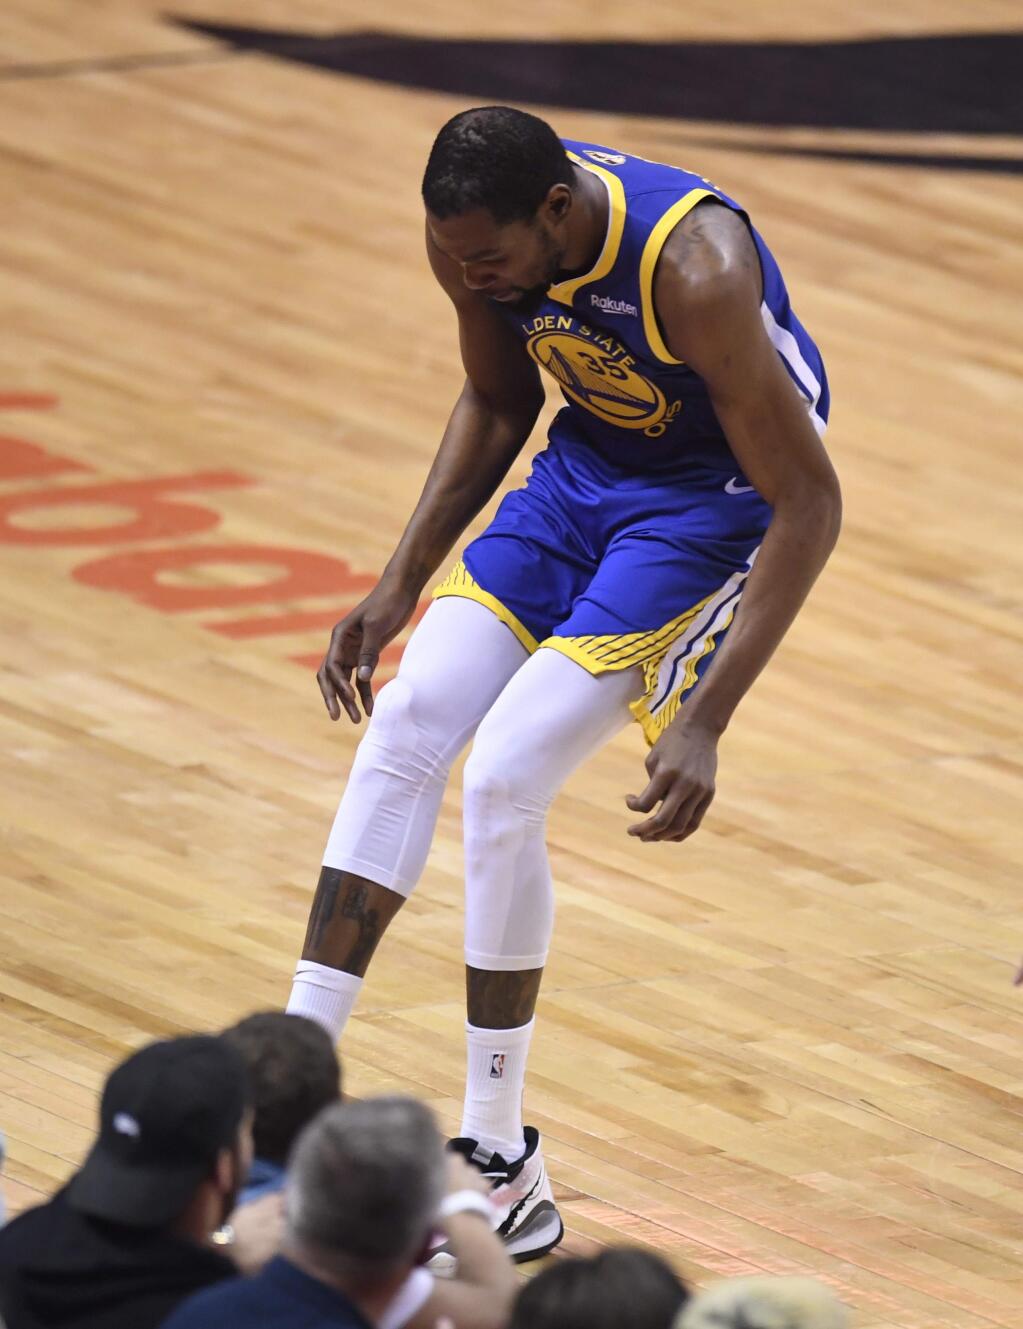 Golden State Warriors forward Kevin Durant hobbles after injuring his right leg during first-half action in Game 5 of the NBA Finals against the Toronto Raptors in Toronto, Monday, June 10, 2019. (Frank Gunn/The Canadian Press via AP)